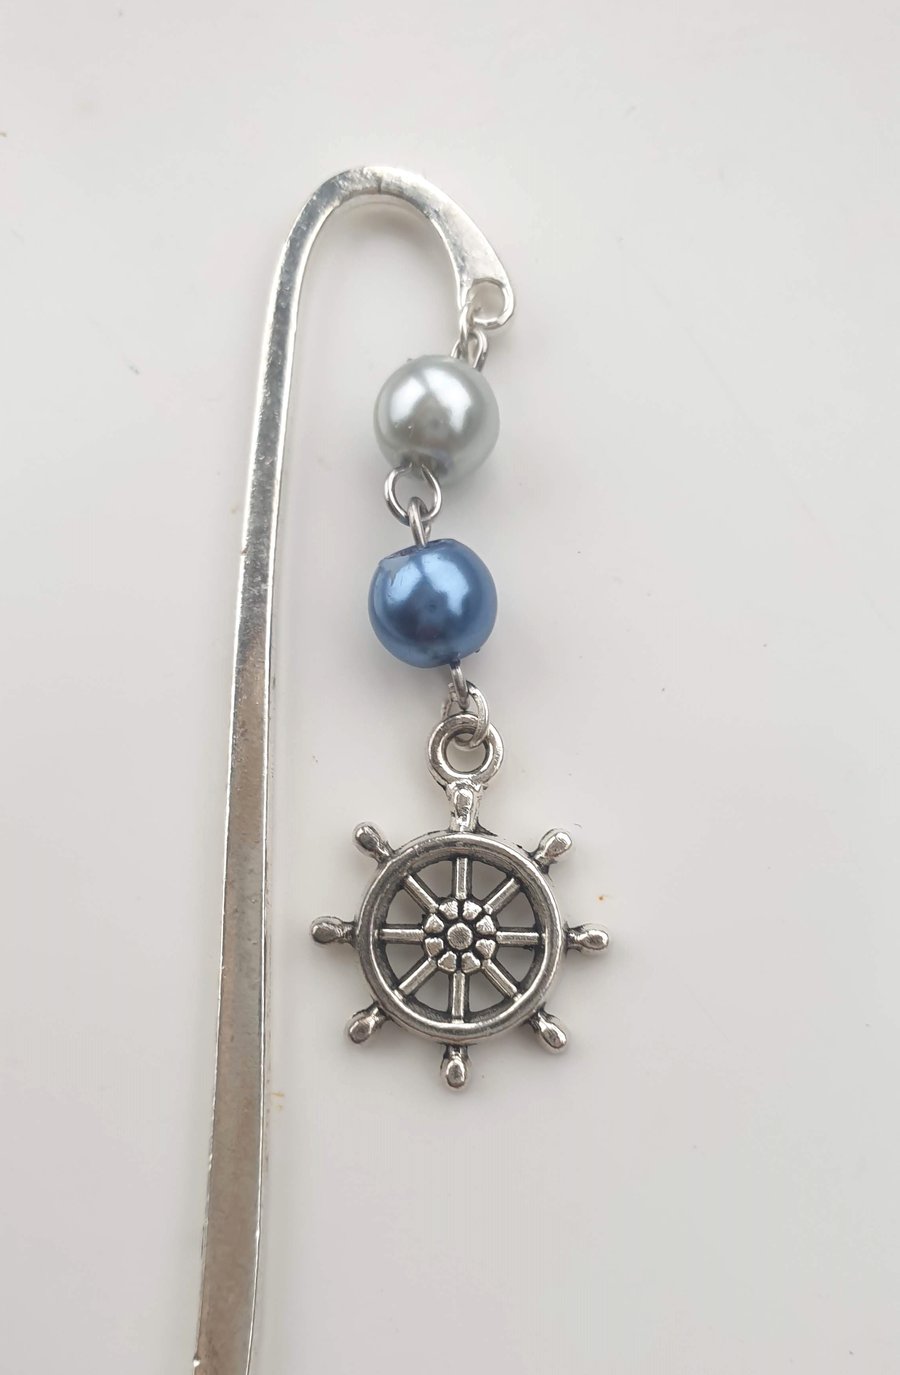 Silver-Plated Bookmark with Two Imitation Pearls and Ships Wheel Charm